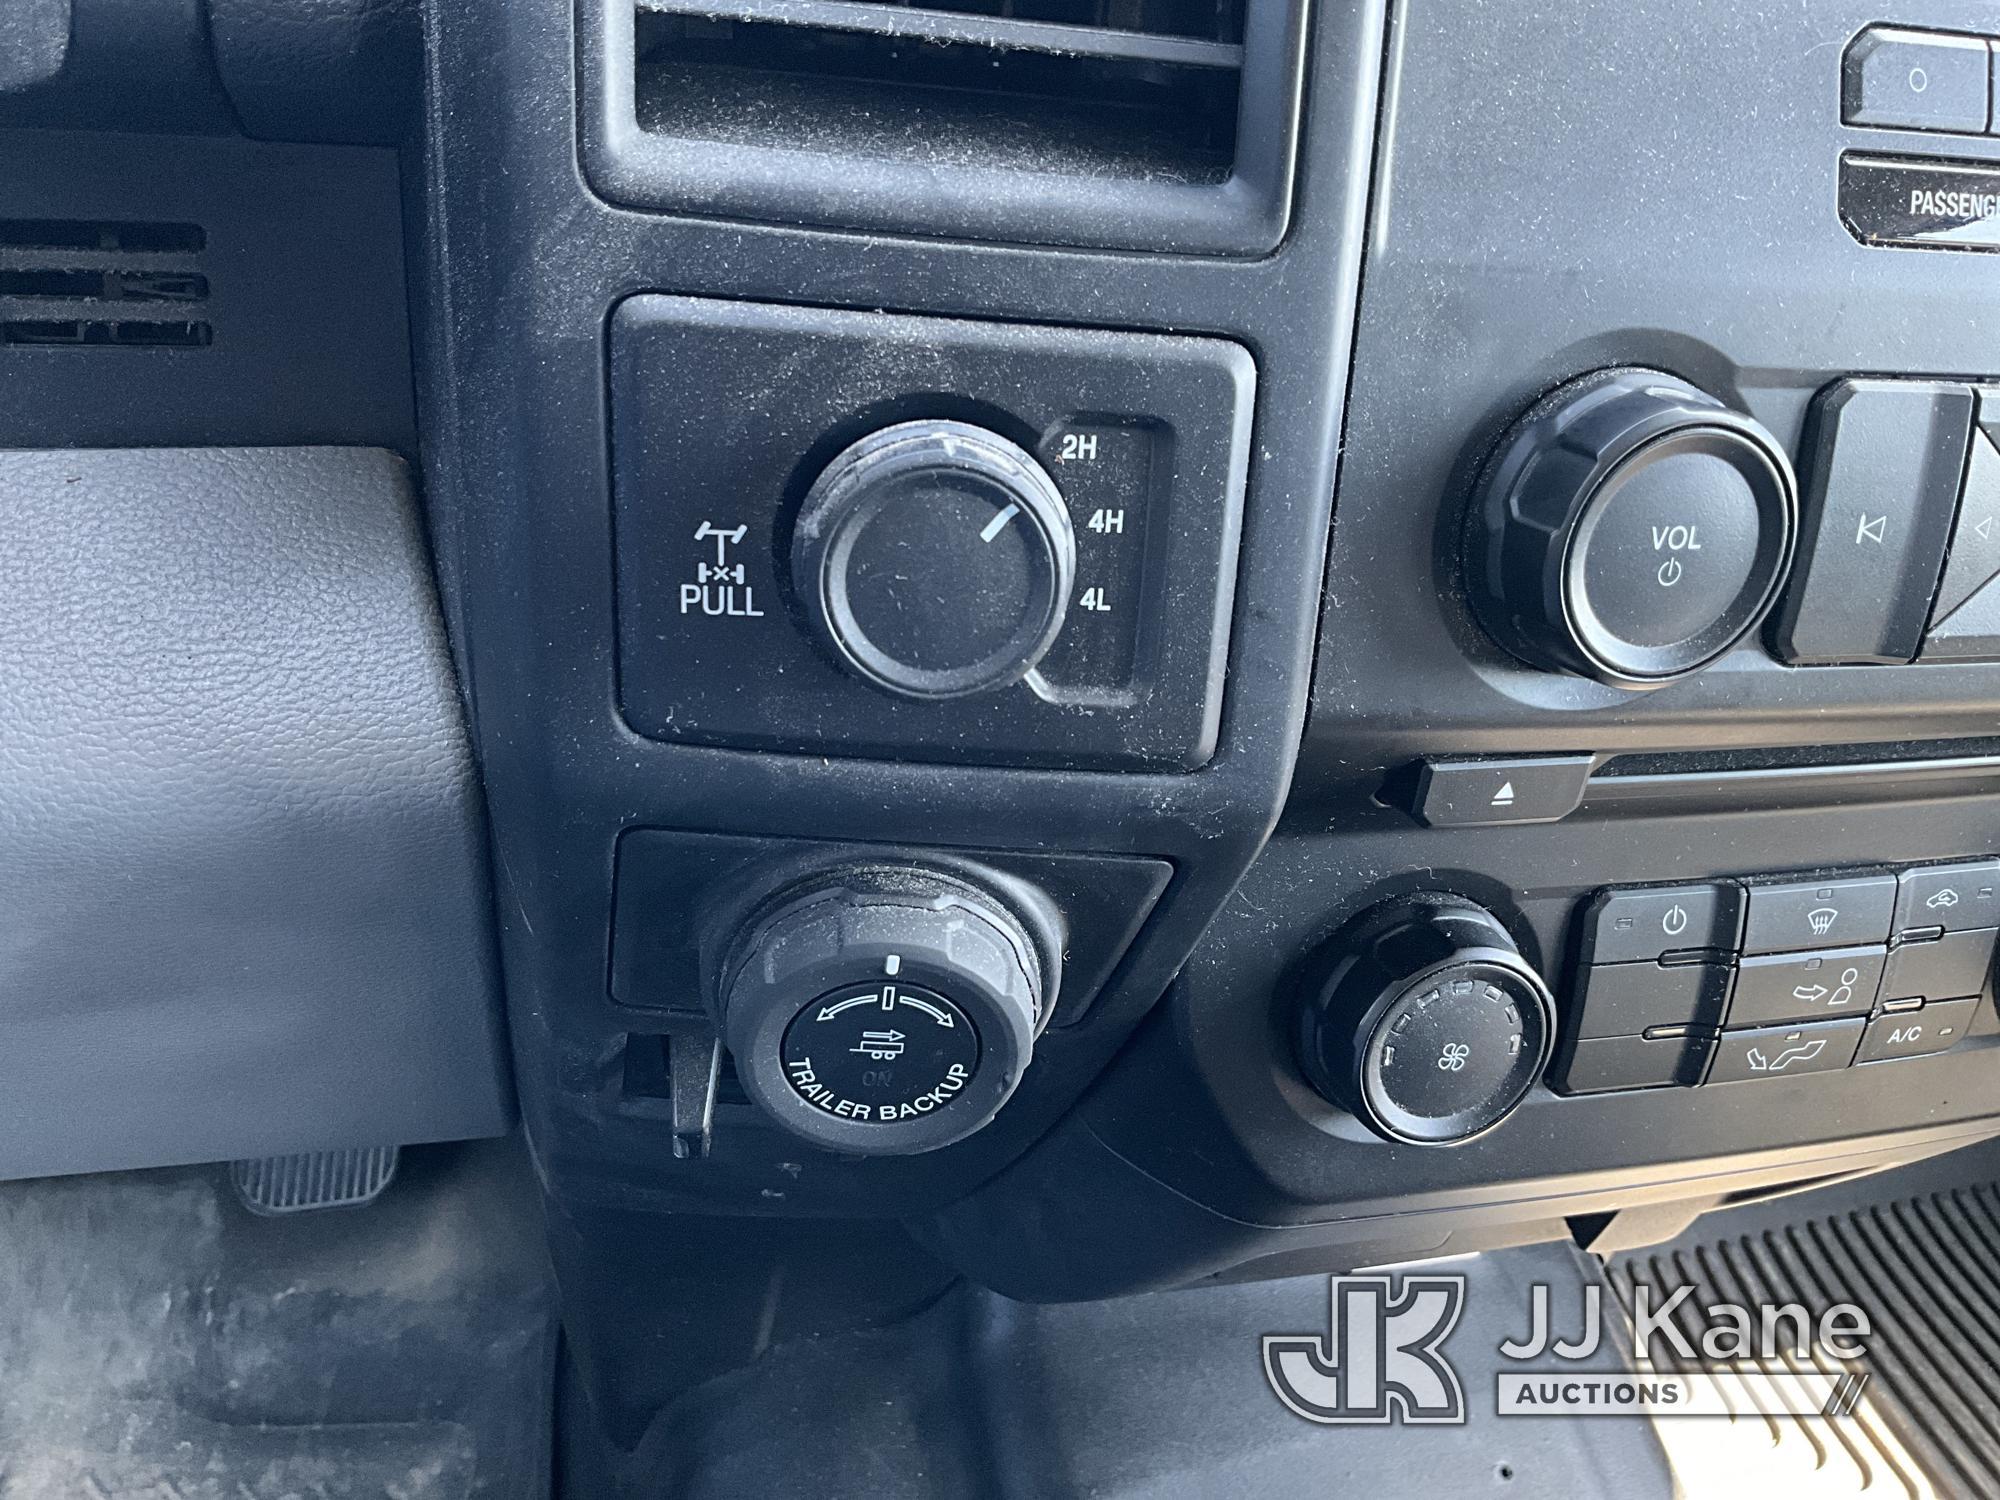 (Azle, TX) 2017 Ford F150 4x4 Crew-Cab Pickup Truck Runs & Moves) (Engine Whines Intermittently, Dri